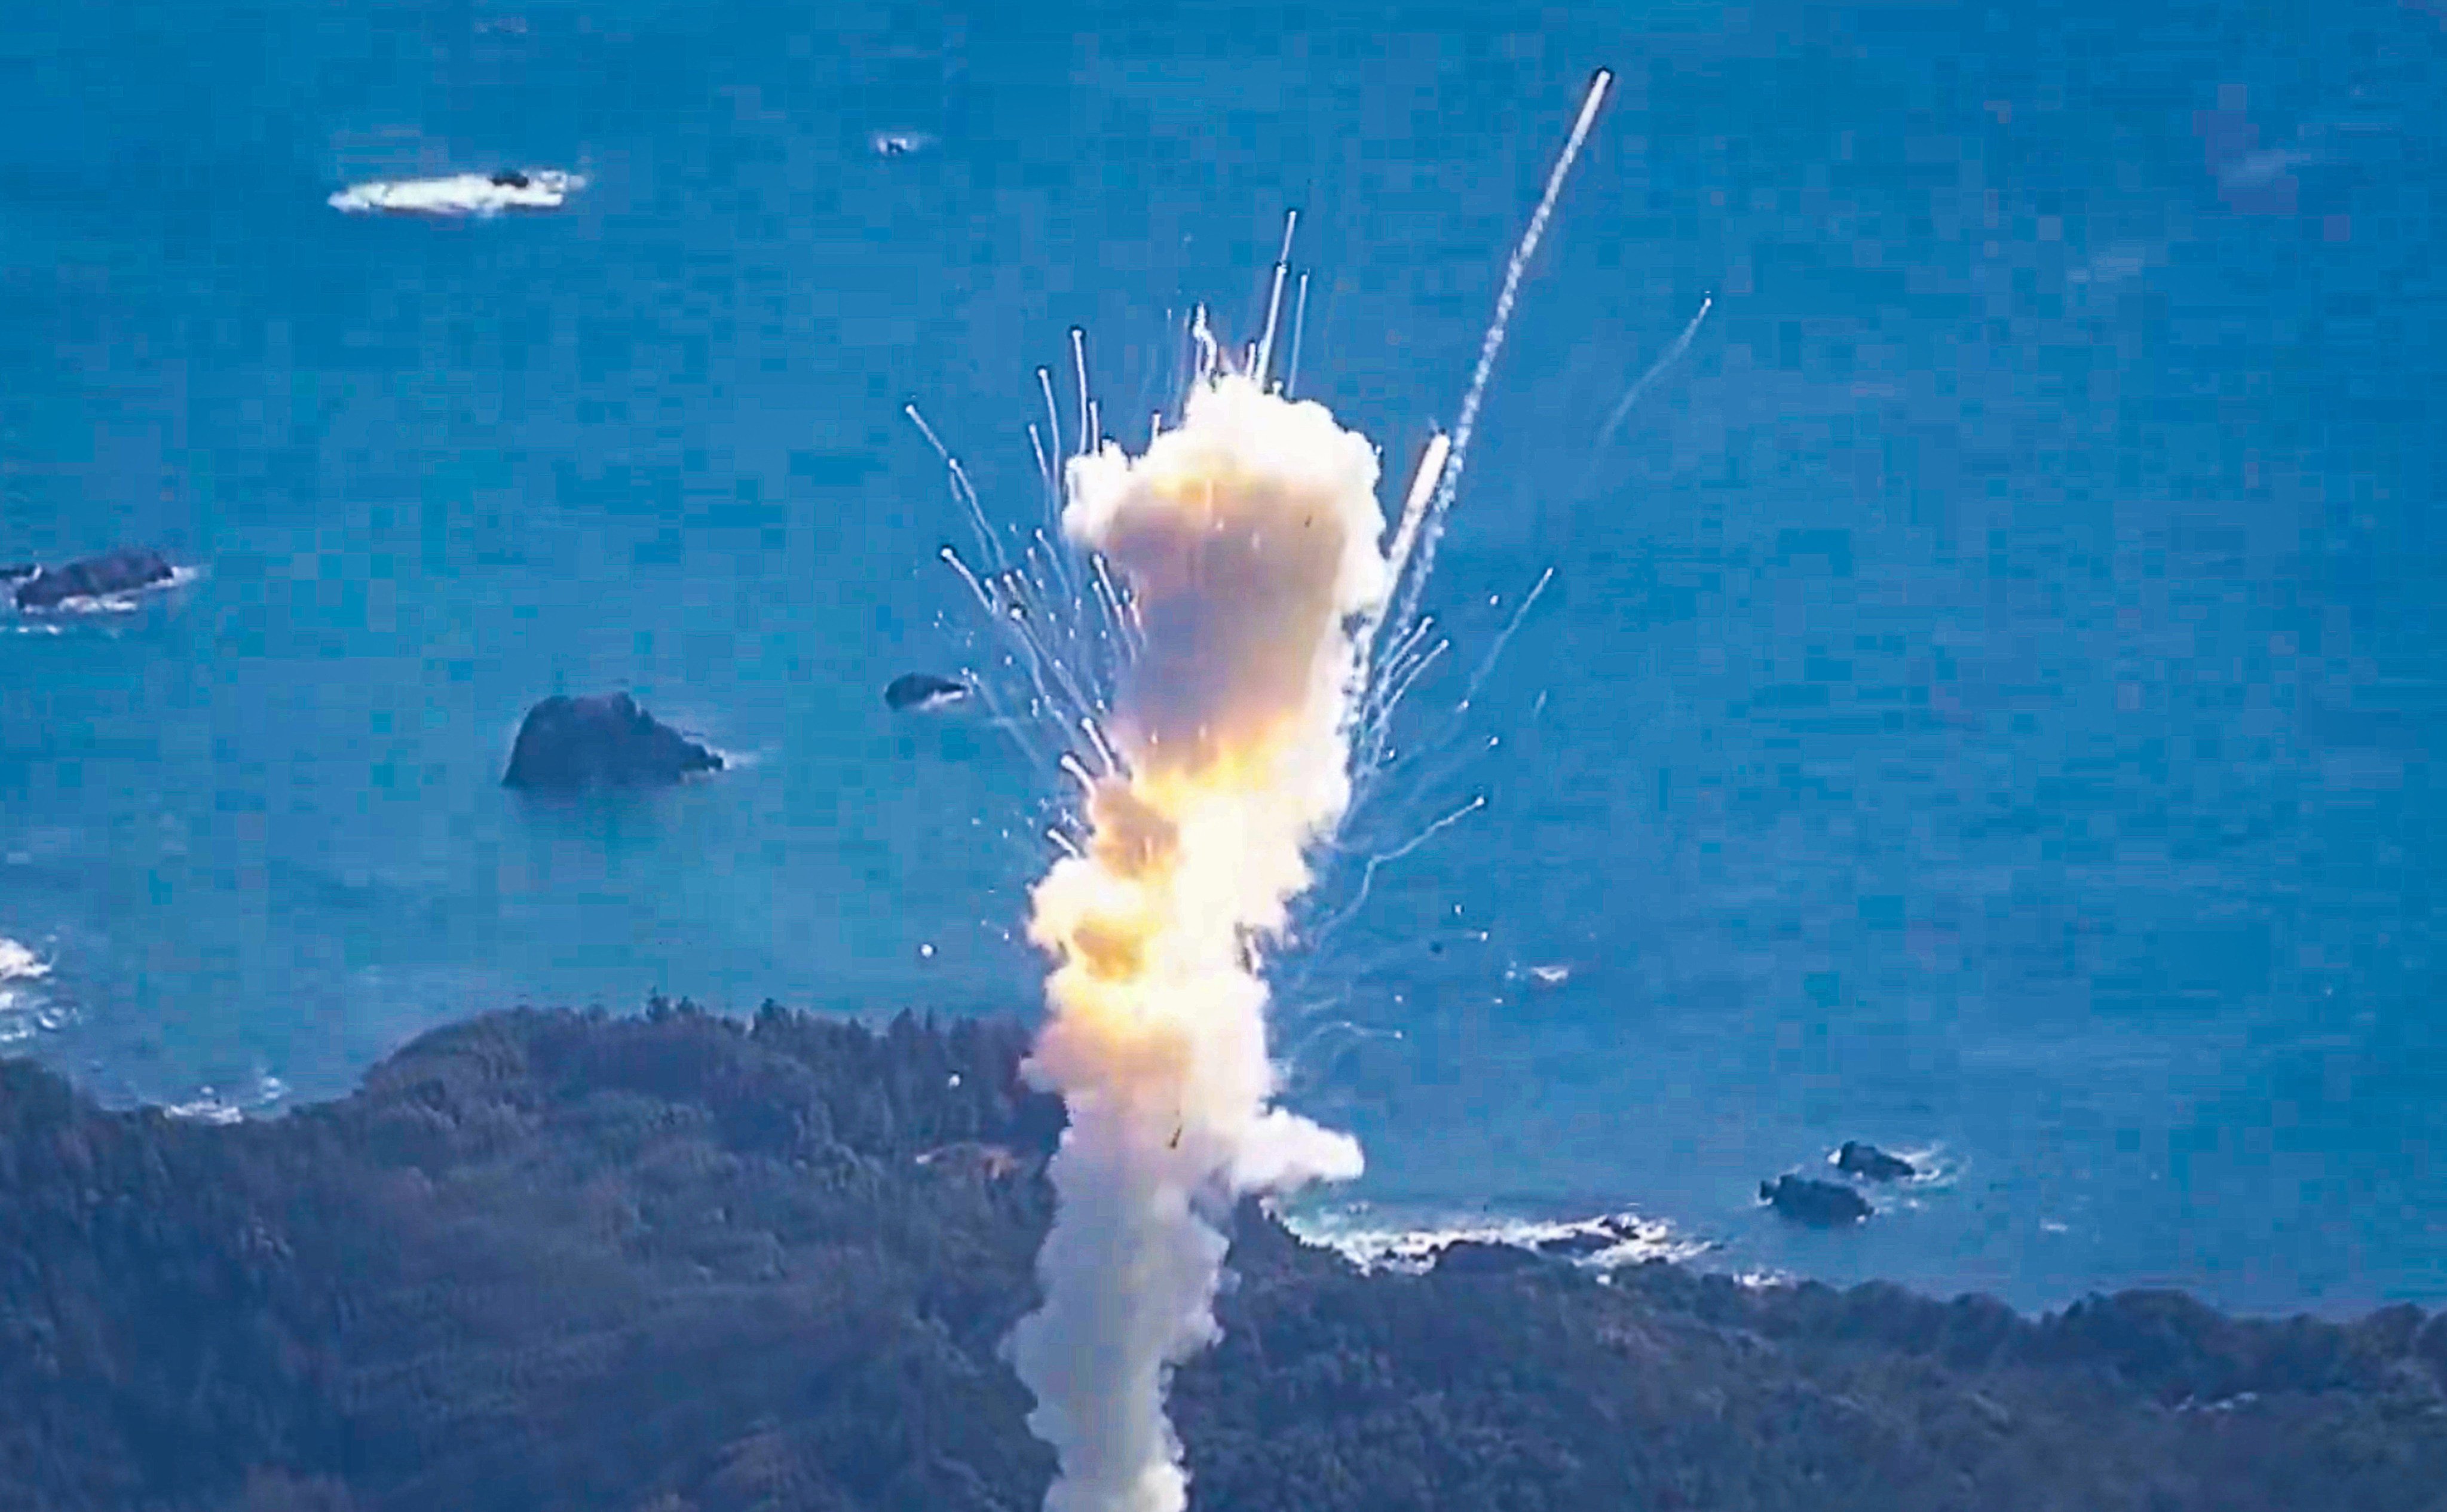 Japan’s Space One’s small, solid-fuelled Kairos rocket exploded shortly after launch on its inaugural trip on Wednesday as the firm tried to become the first Japanese company to put a satellite in orbit. Photo: MBS